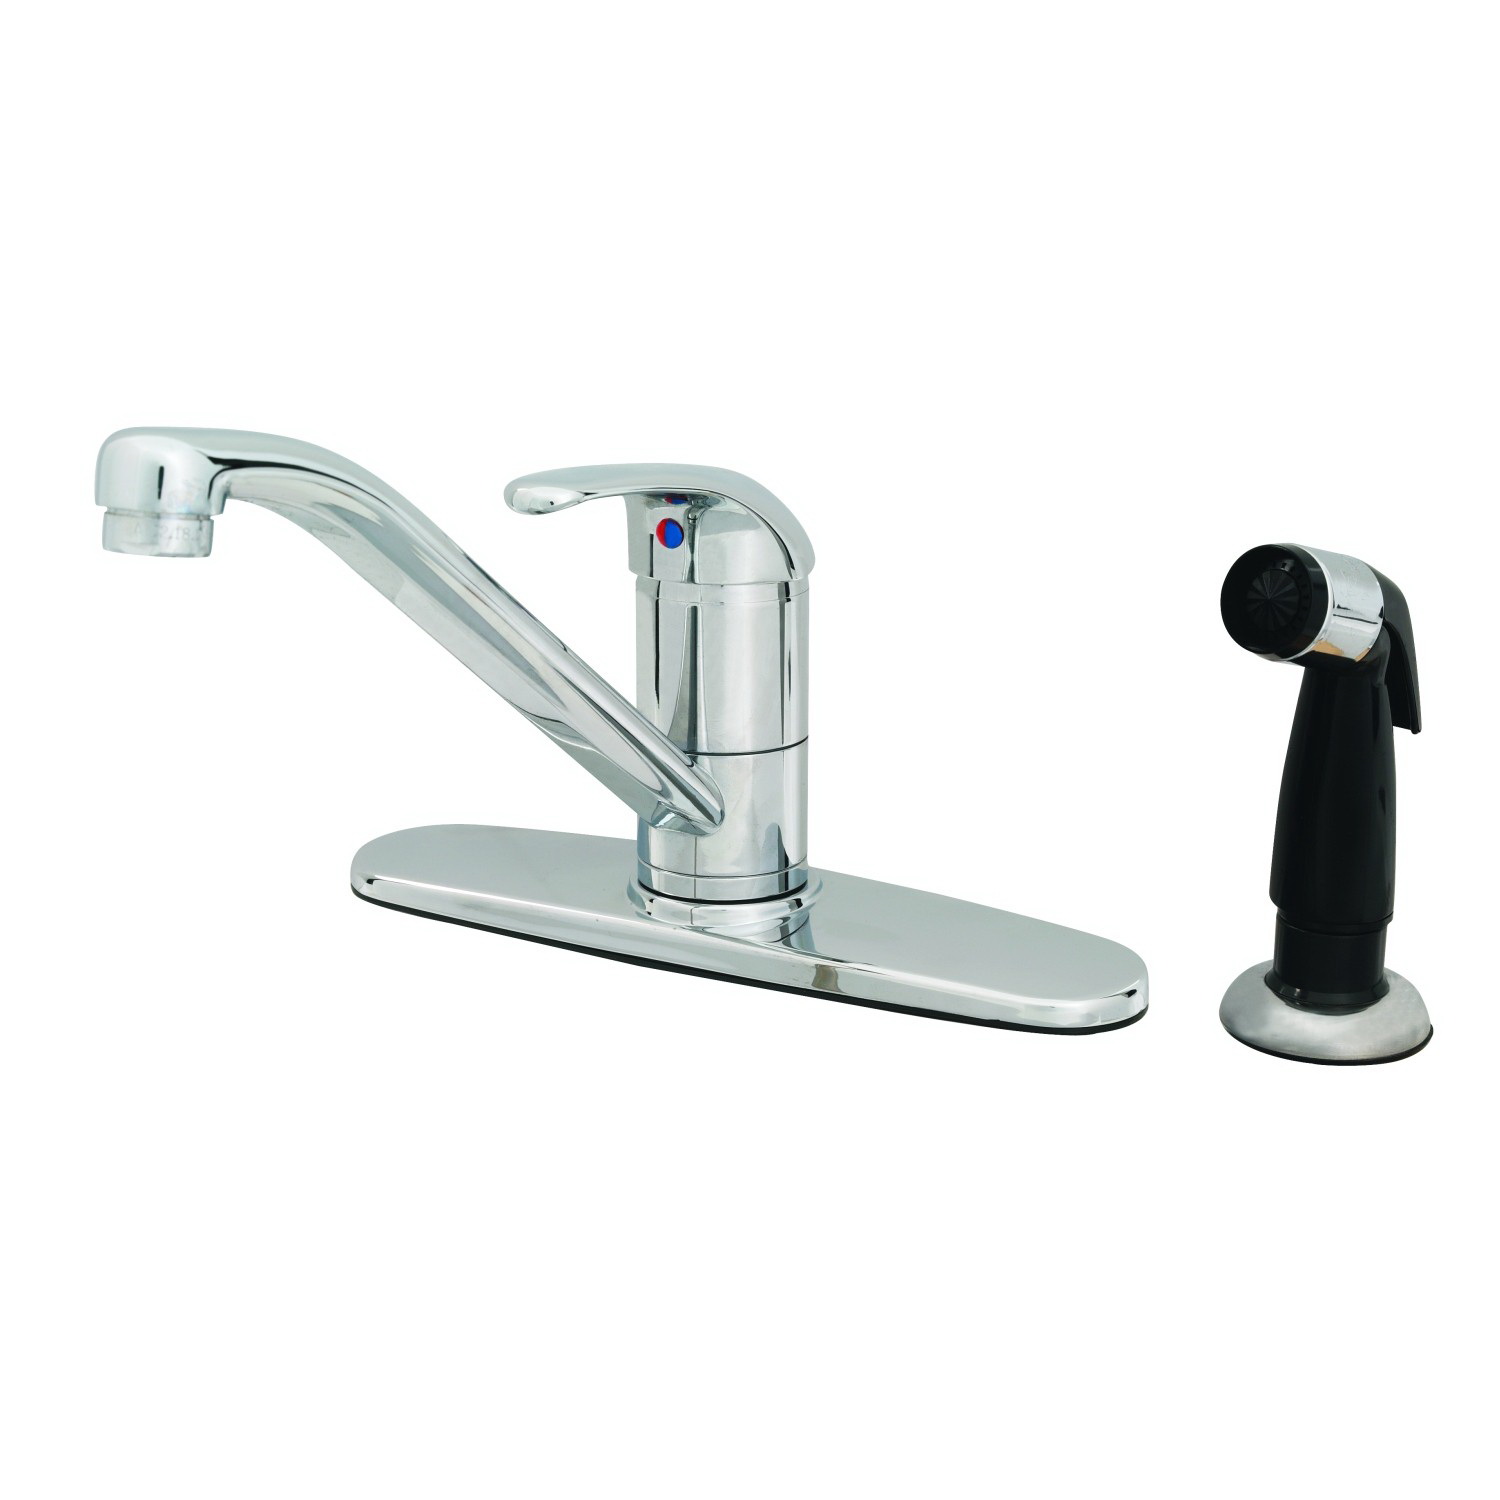 T & S B-2730 Polished Chrome Brass Lever Handle Kitchen Faucet with Spray, 3/8 in, Compression